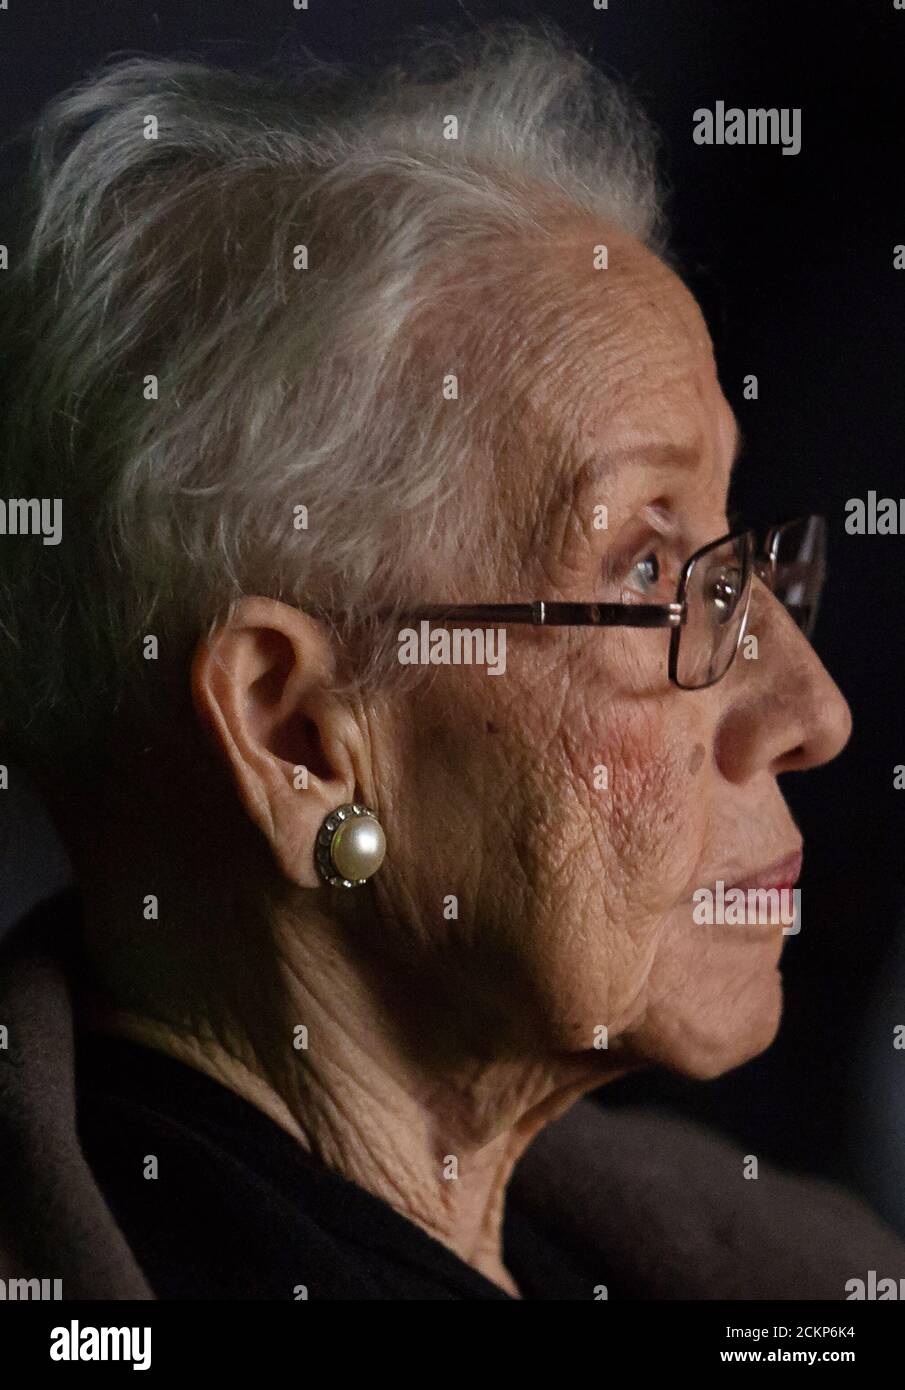 NASA 'human computer' Katherine Johnson watches the premiere of 'Hidden Figures' after a reception where she was honored along with other members of the segregated West Area Computers division of Langley Research Center, on Thursday, December 1, 2016, at the Virginia Air and Space Center in Hampton, Virginia. Johnson was the African American mathematician, physicist, and space scientist, who calculated flight trajectories for John Glenn's first orbital flight in 1962. Stock Photo